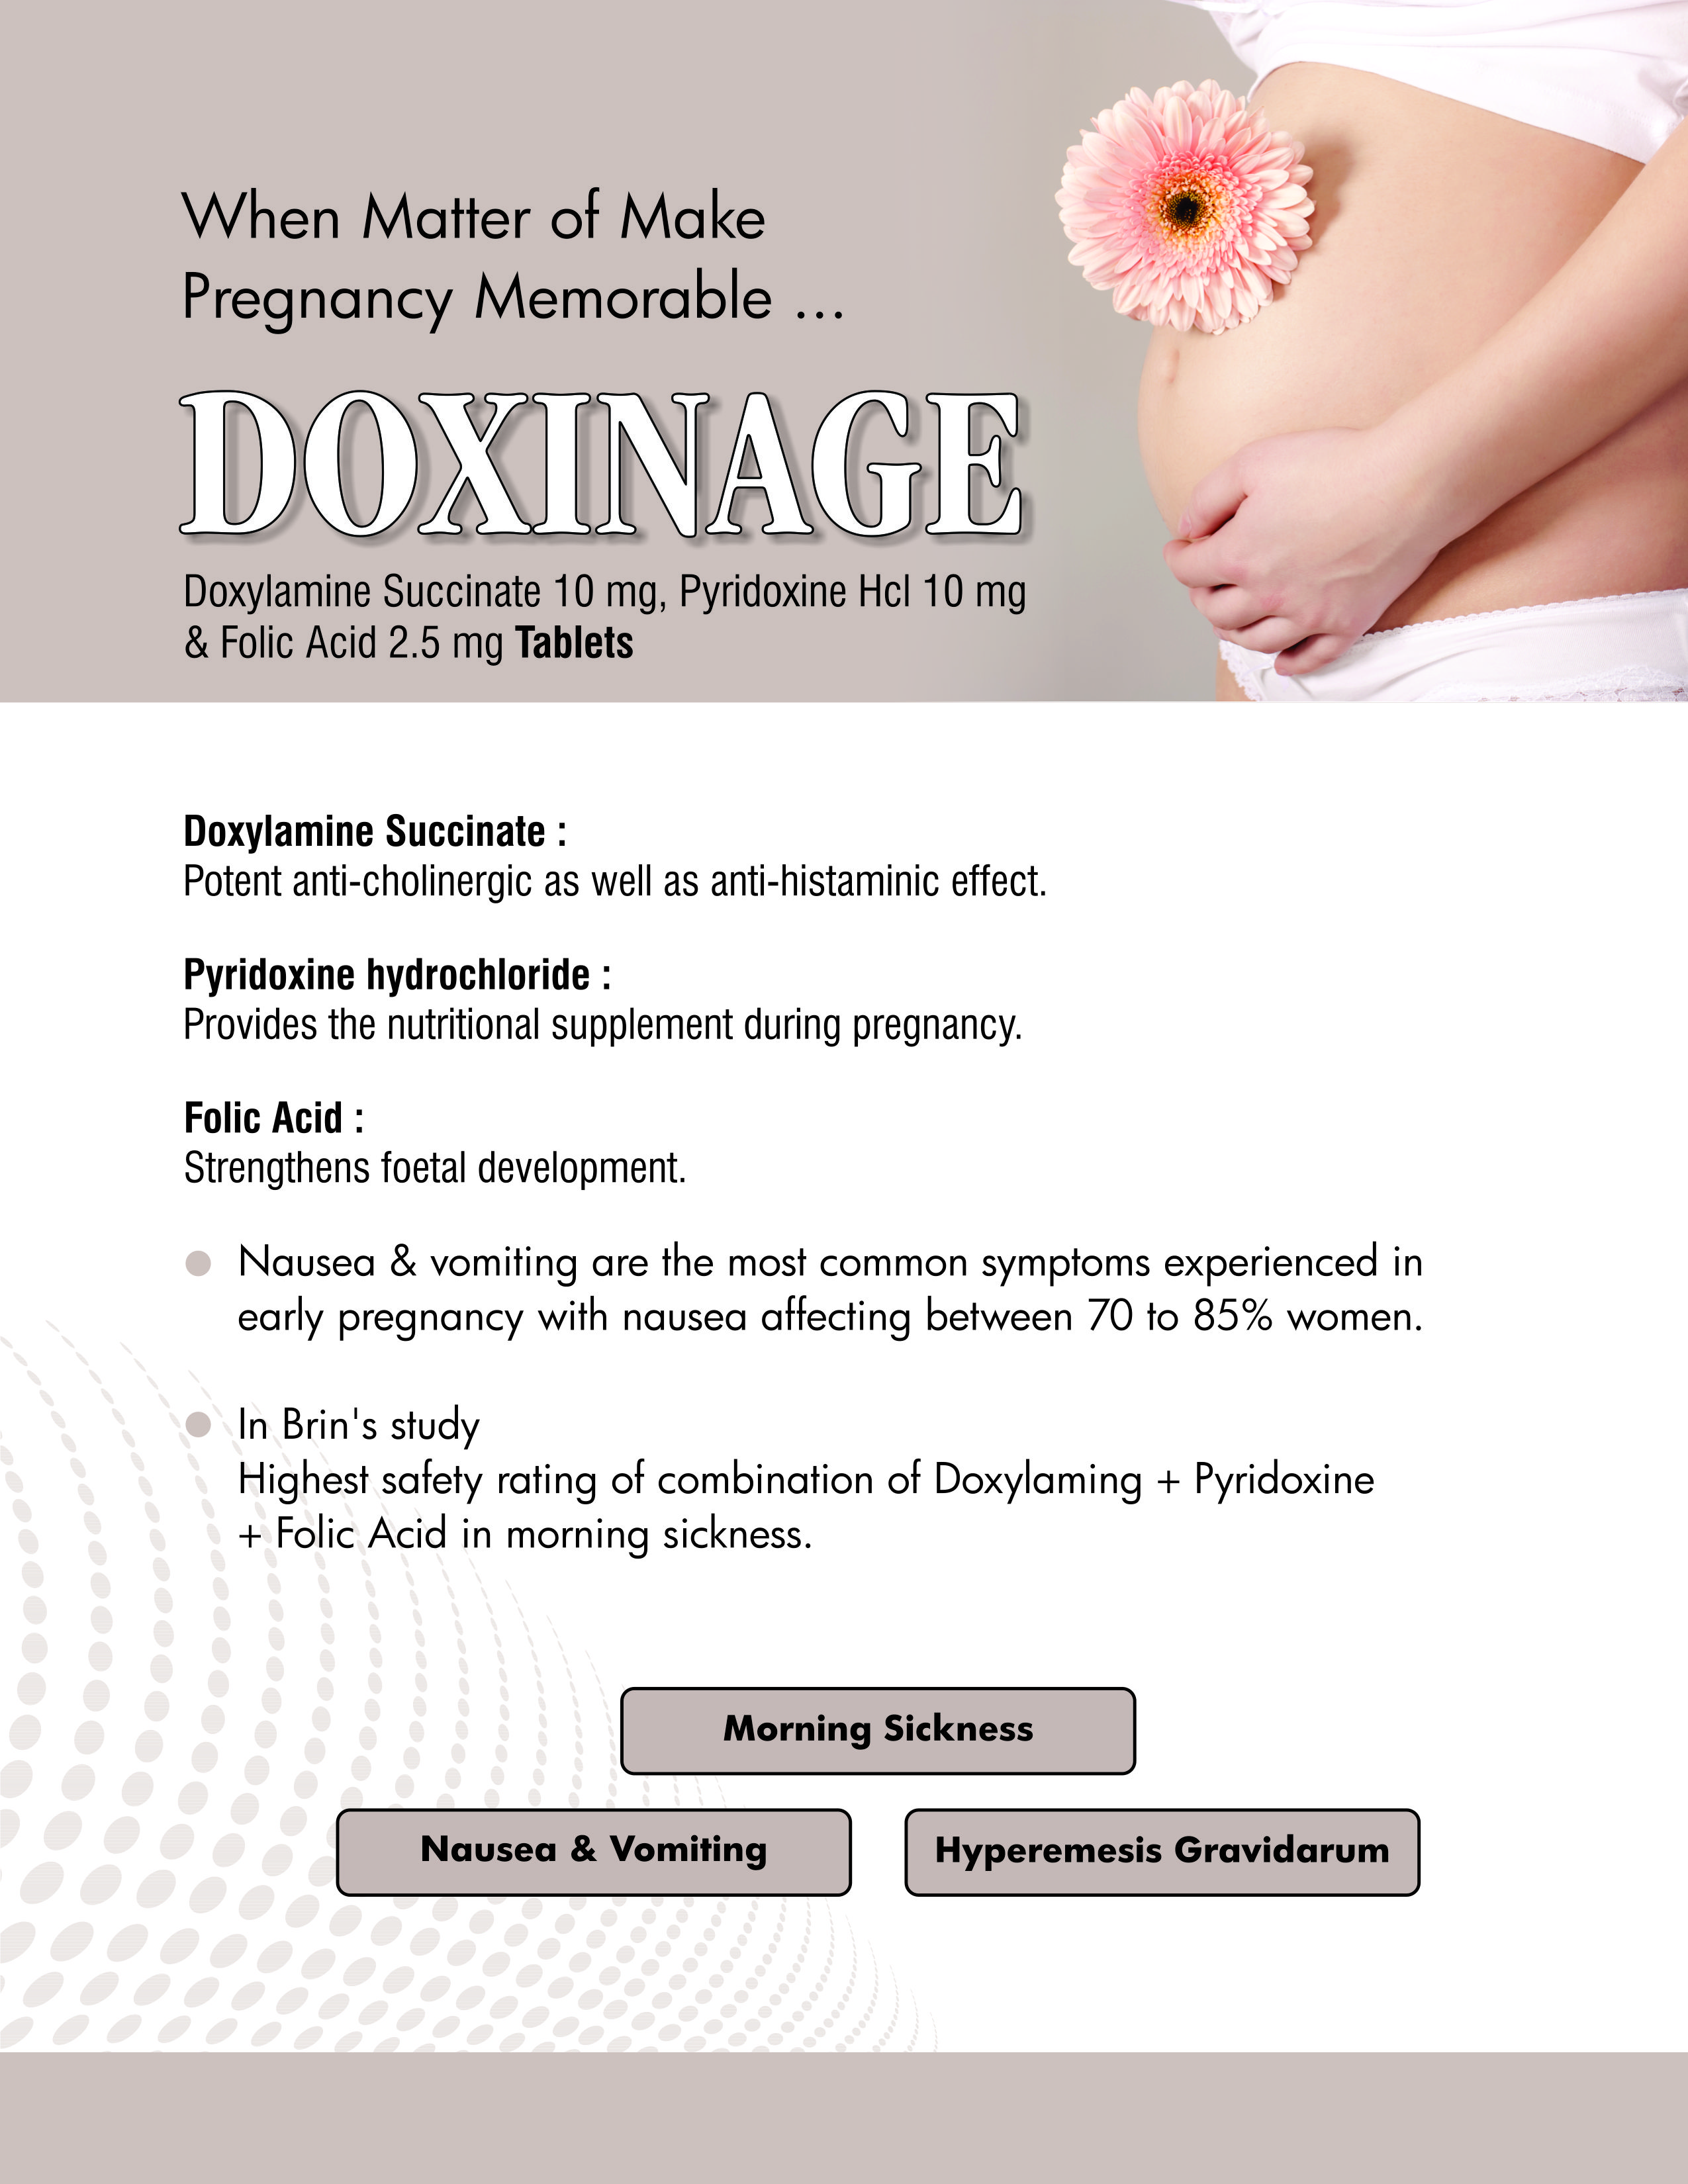 Doxinage, Allenge India